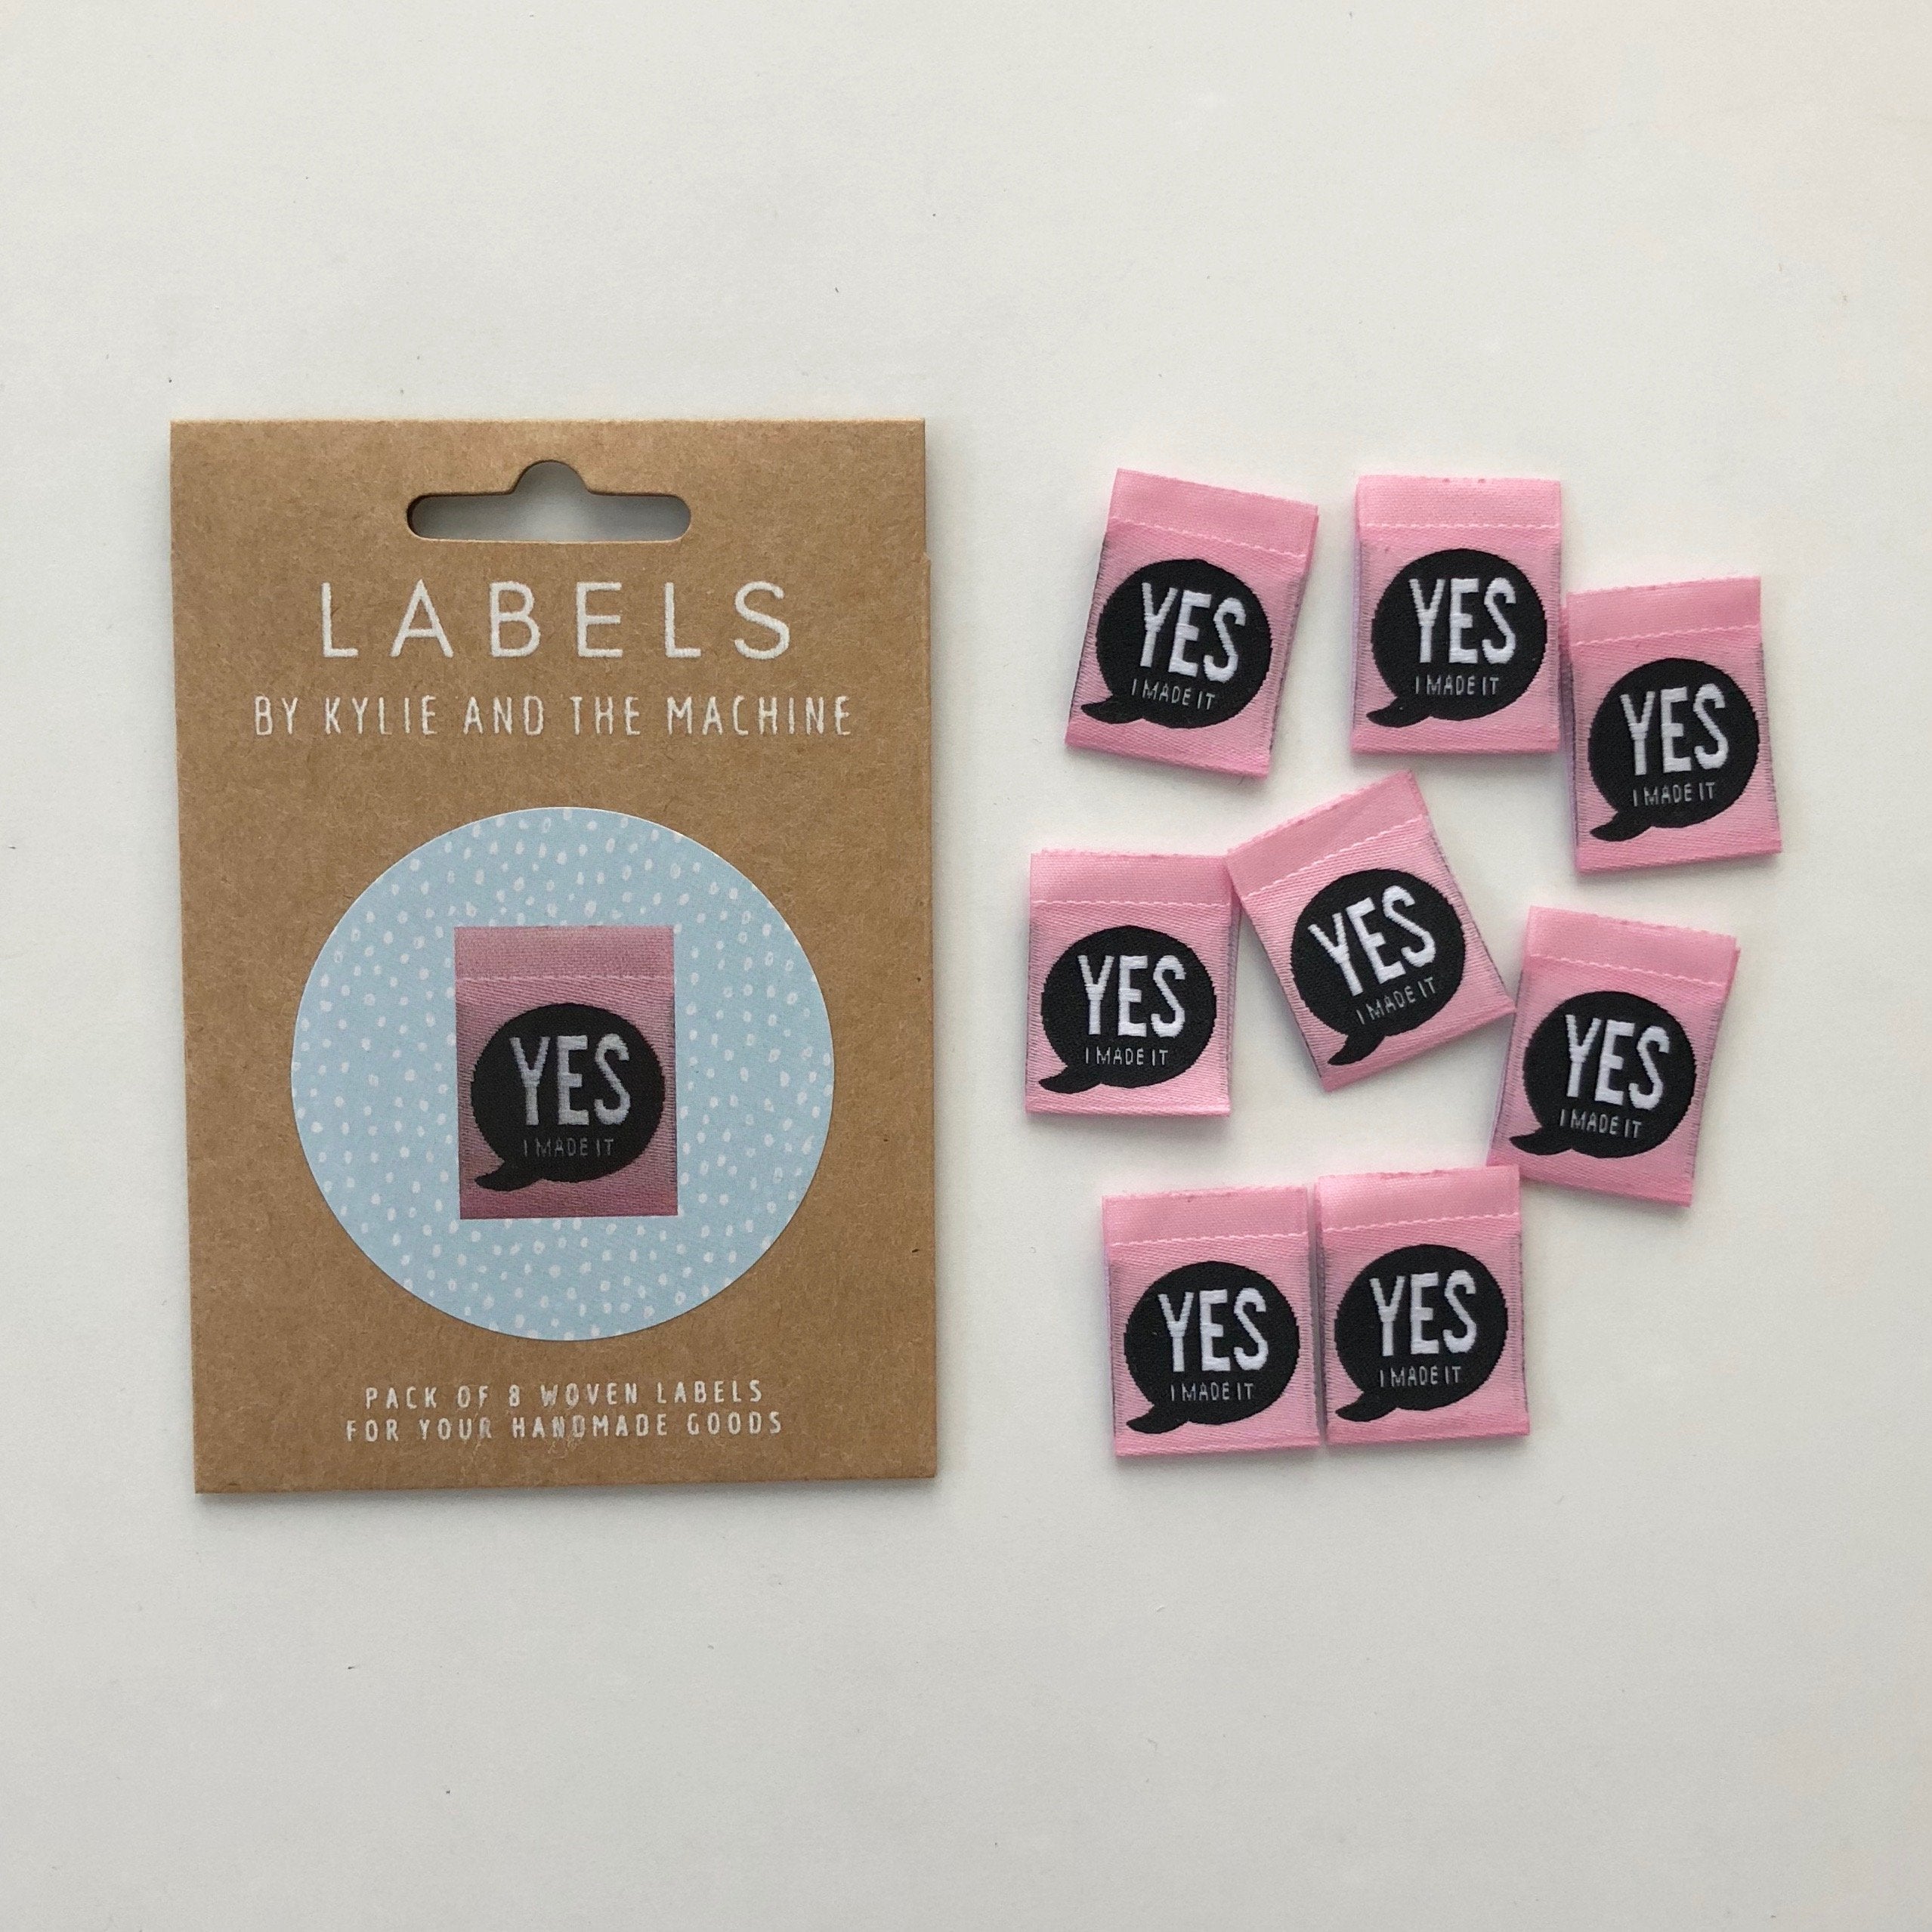 Kylie and the Machine - "YES I MADE IT" Pack of 8 Woven Labels